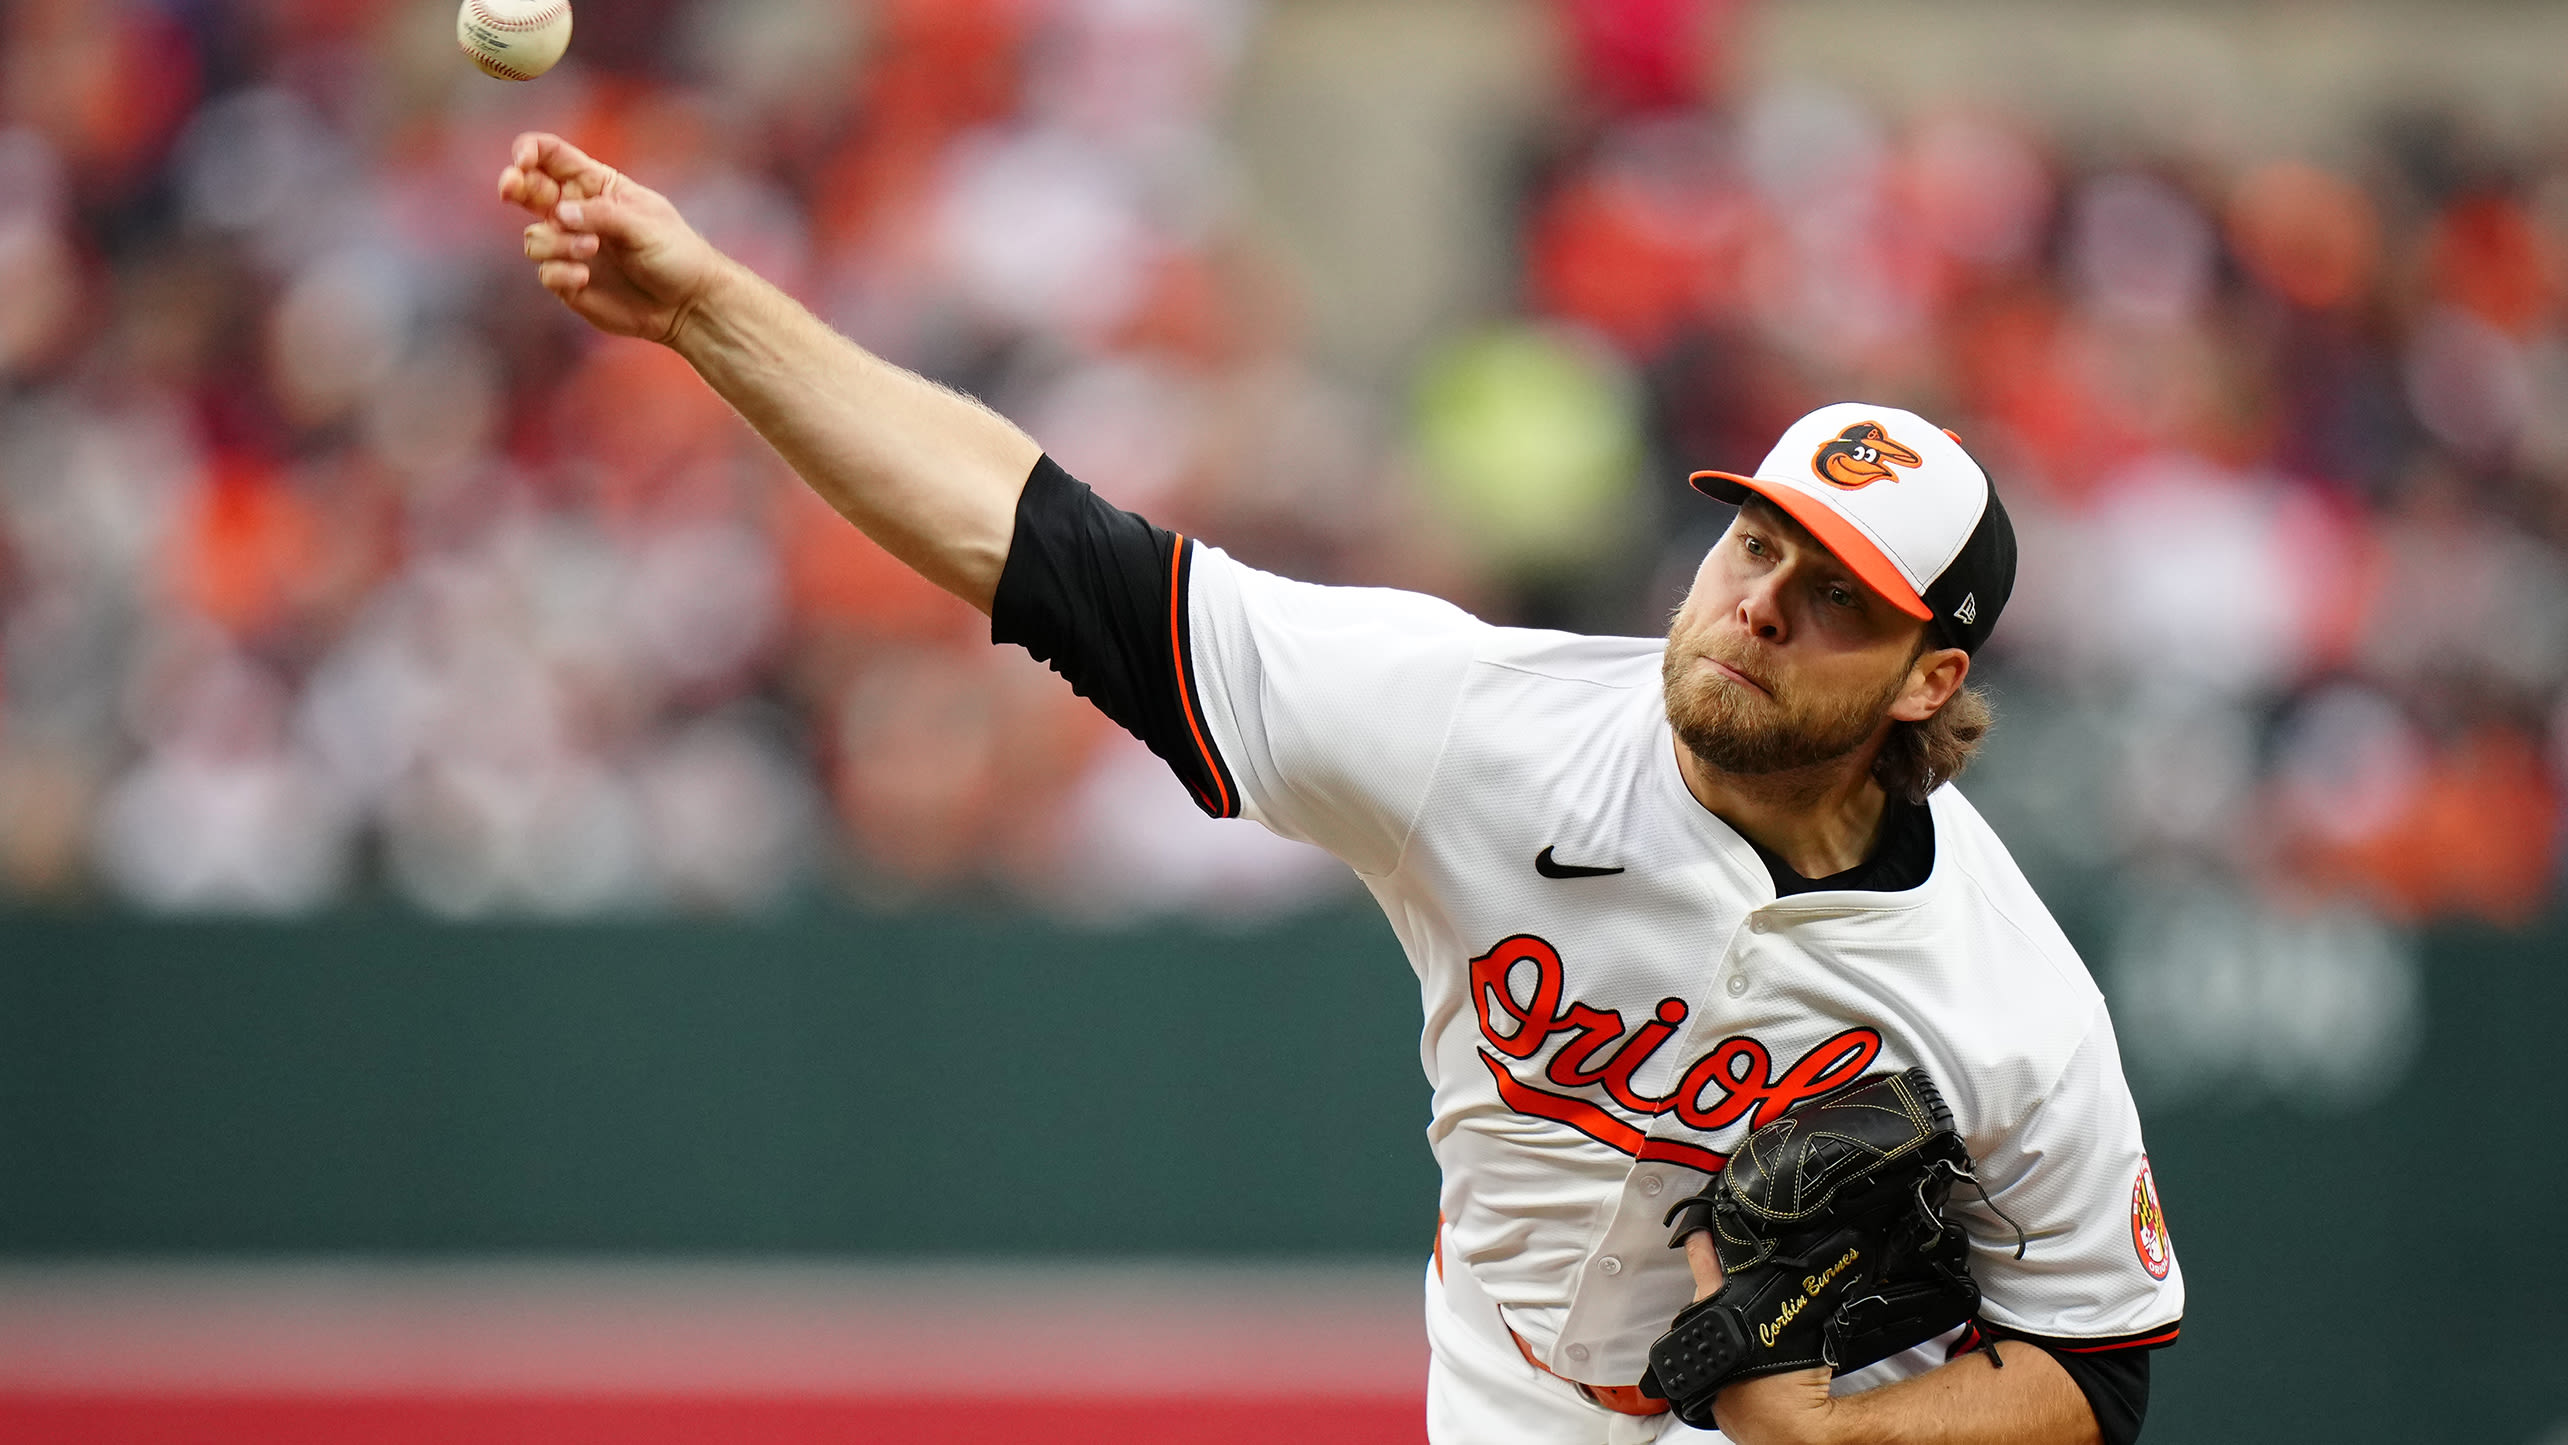 Corbin Burnes had the debut Orioles fans were hoping to see